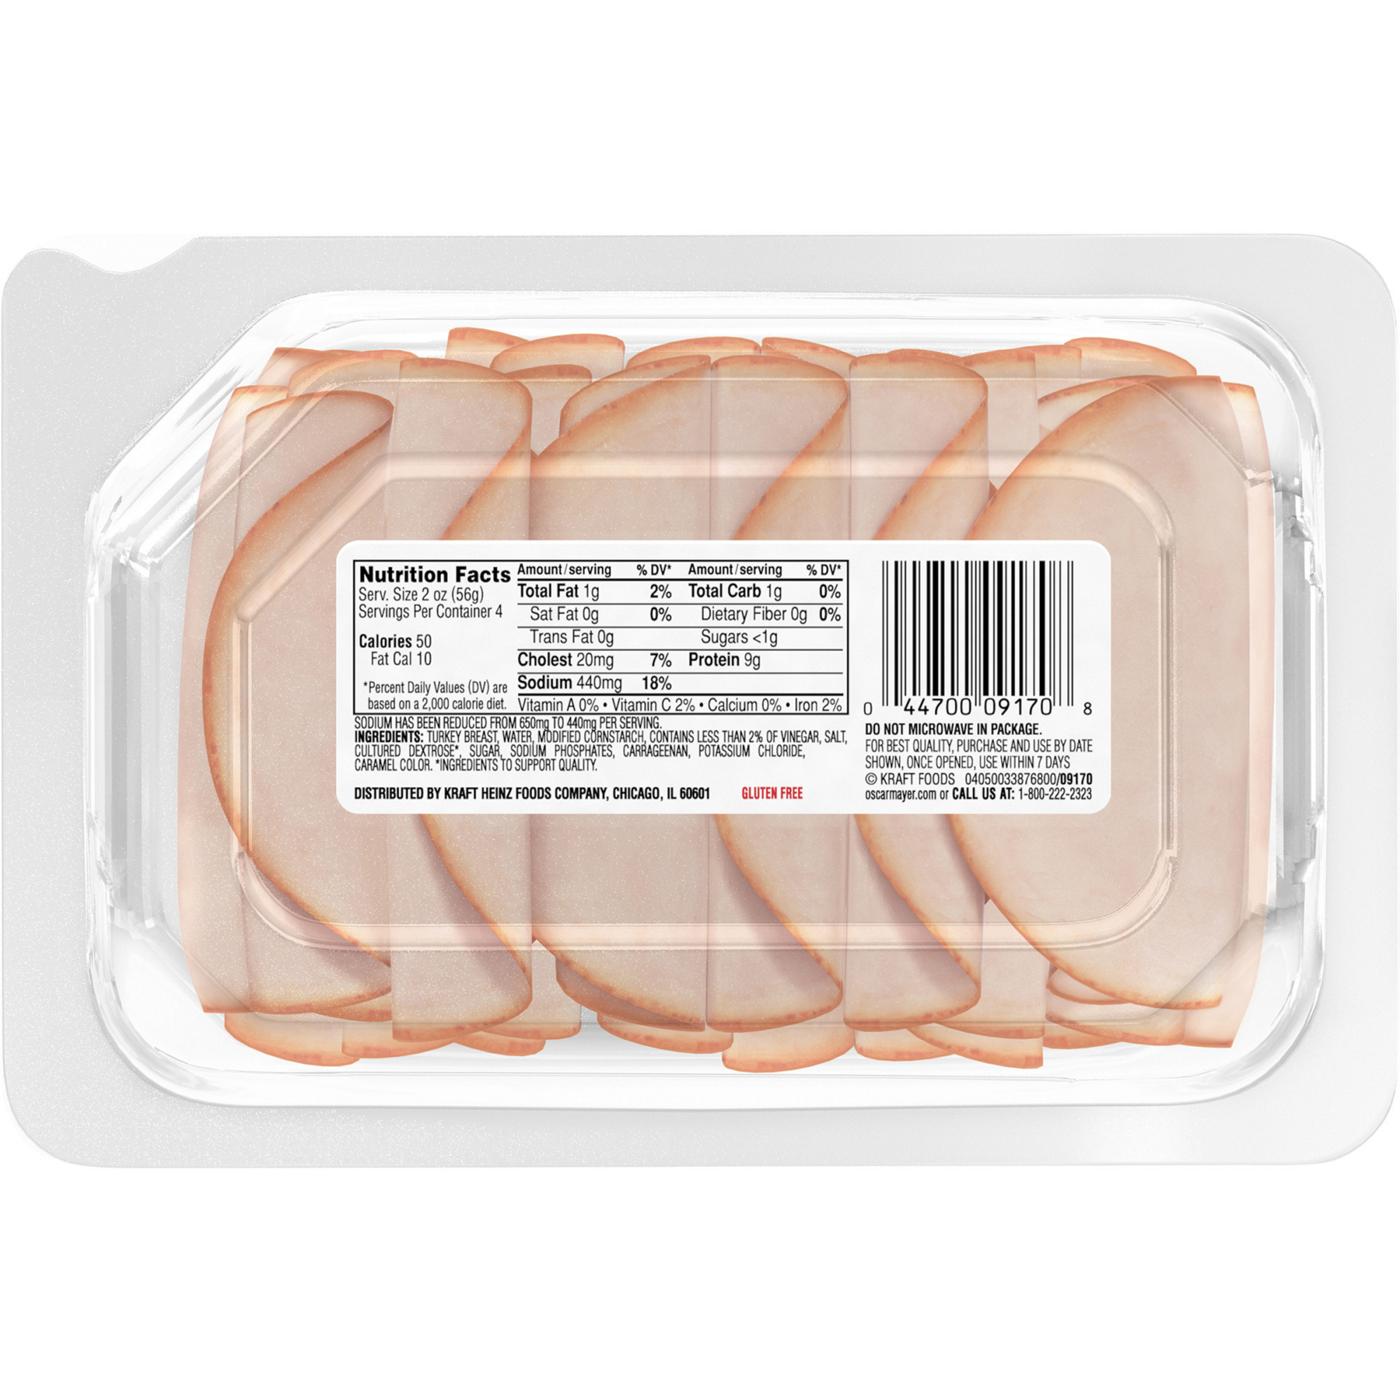 Oscar Mayer Deli Fresh Lower Sodium Oven Roasted Sliced Turkey Breast Lunch Meat; image 2 of 6